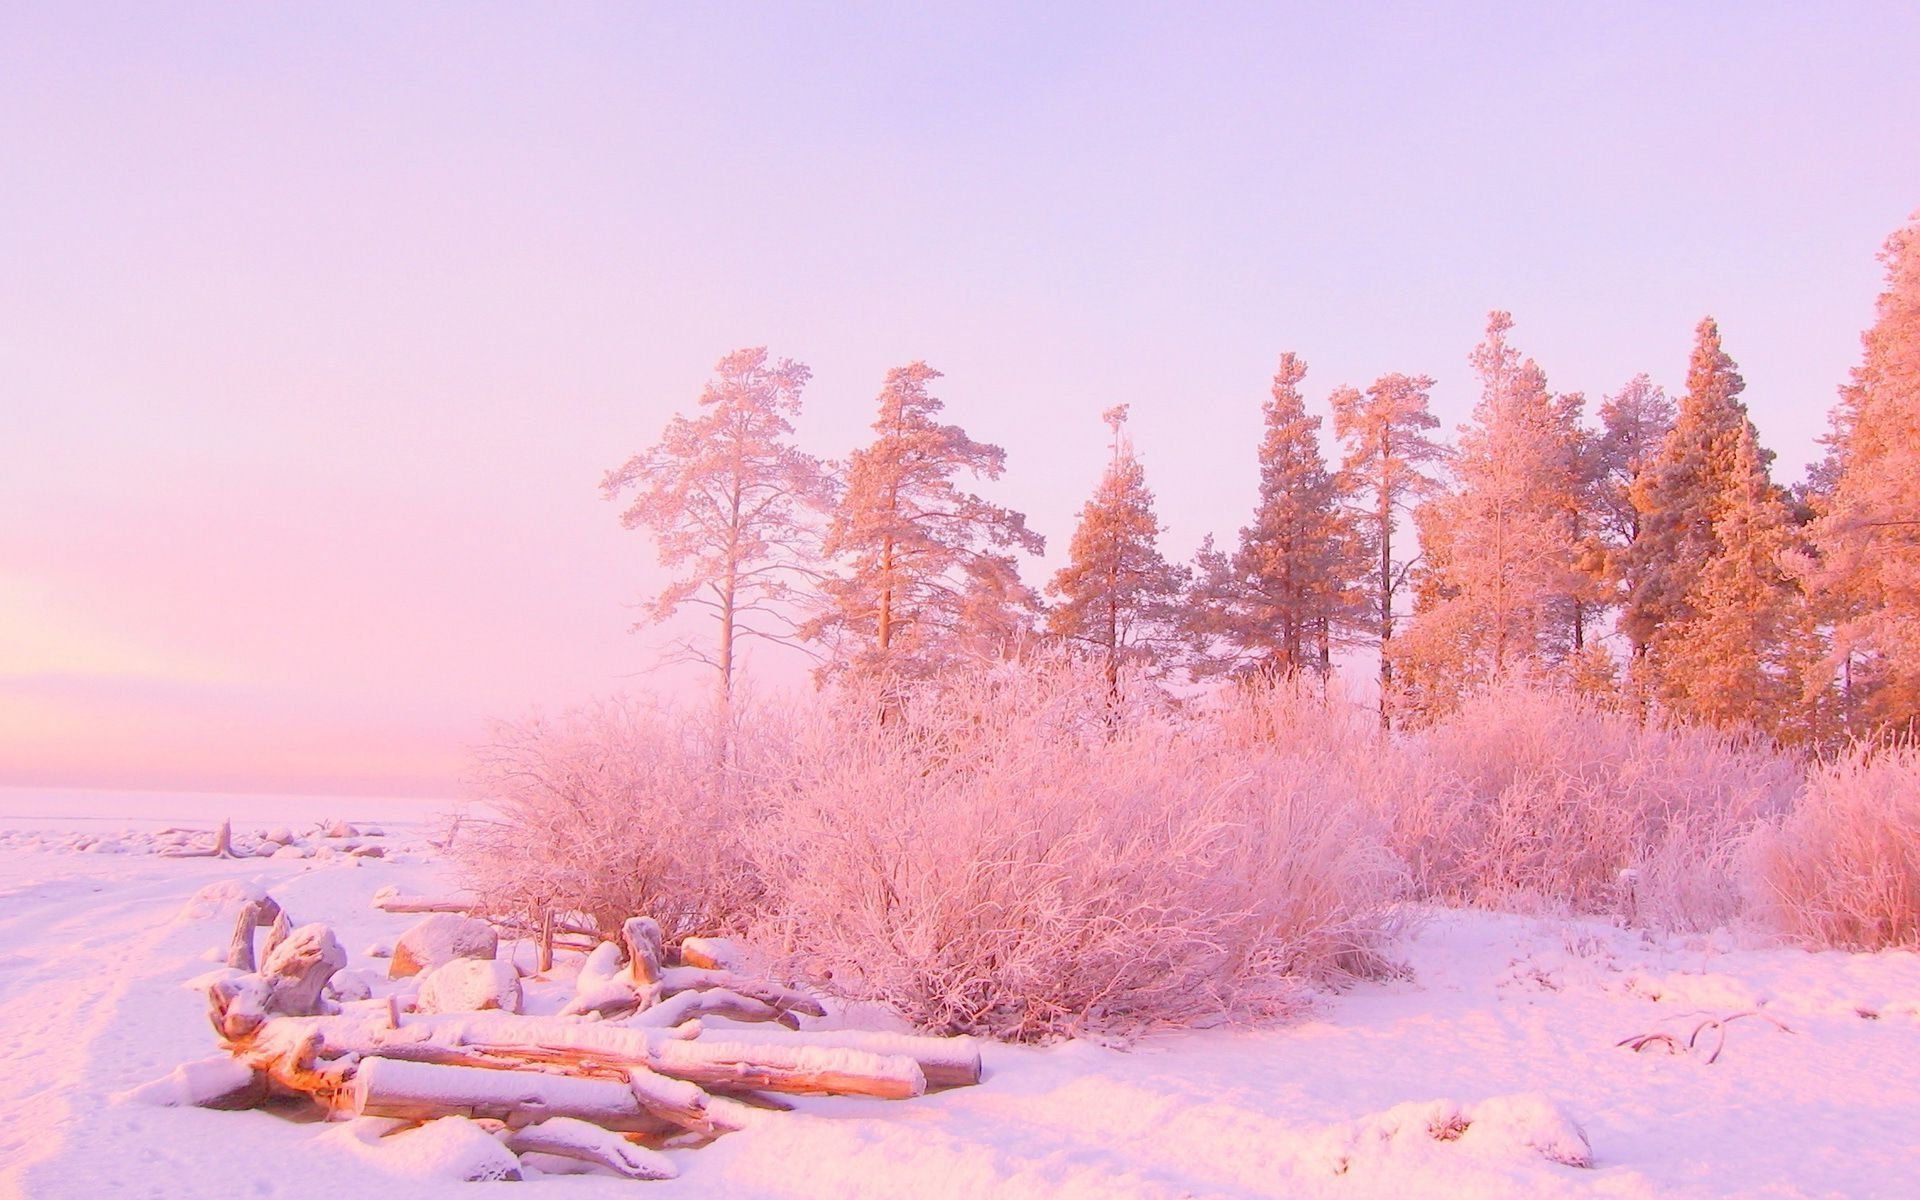 Cute Aesthetic Winter Wallpapers Wallpapers